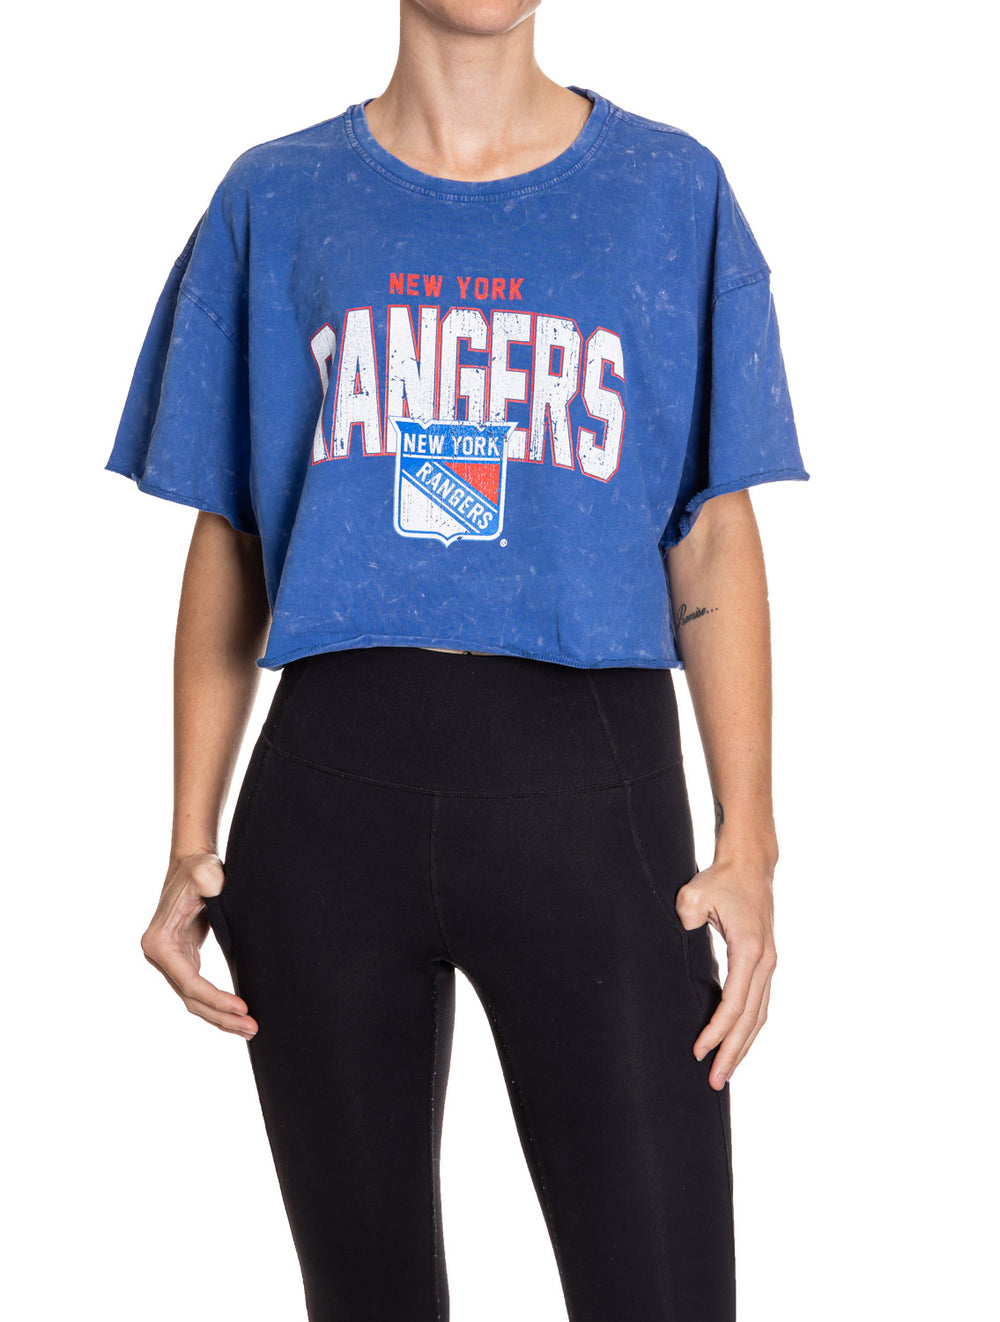 Woman standing in front of a white background wearing an oversized, blue, acid wash crop top - featuring a New York Rangers logo in the center of the shirt.